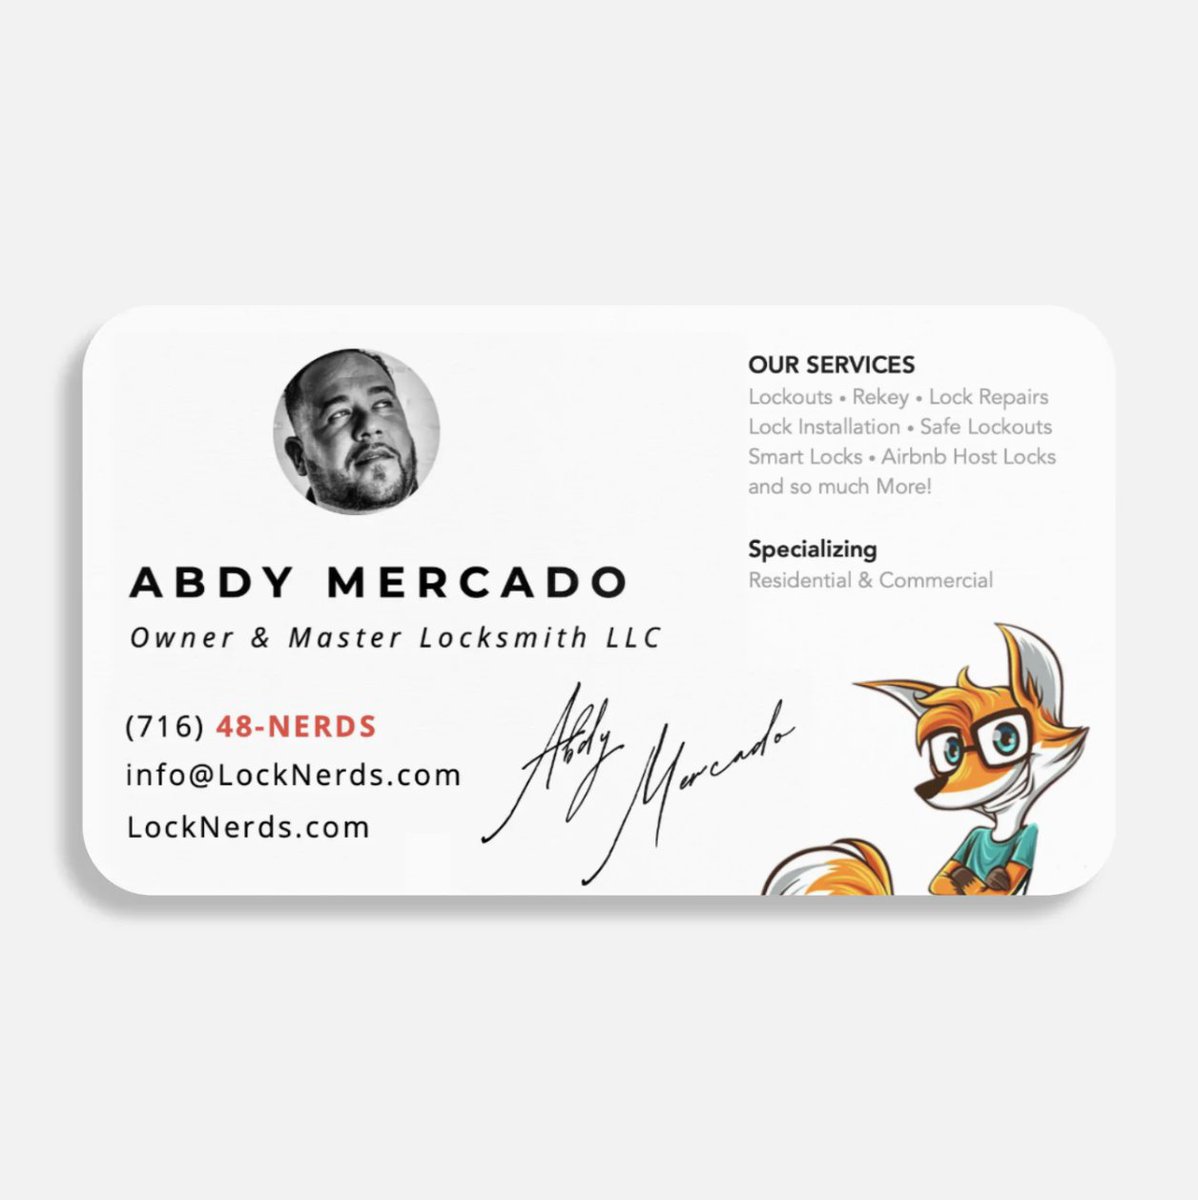 What do you guys think about our new business cards? Leave a comment below and click the thumbs up button if you like it please.

#new #businesscards #Awesome #like4likes #localbusiness #minorityownedbusiness #locksmith #buffalove #service #realtorlife #niagarafalls #locknerds